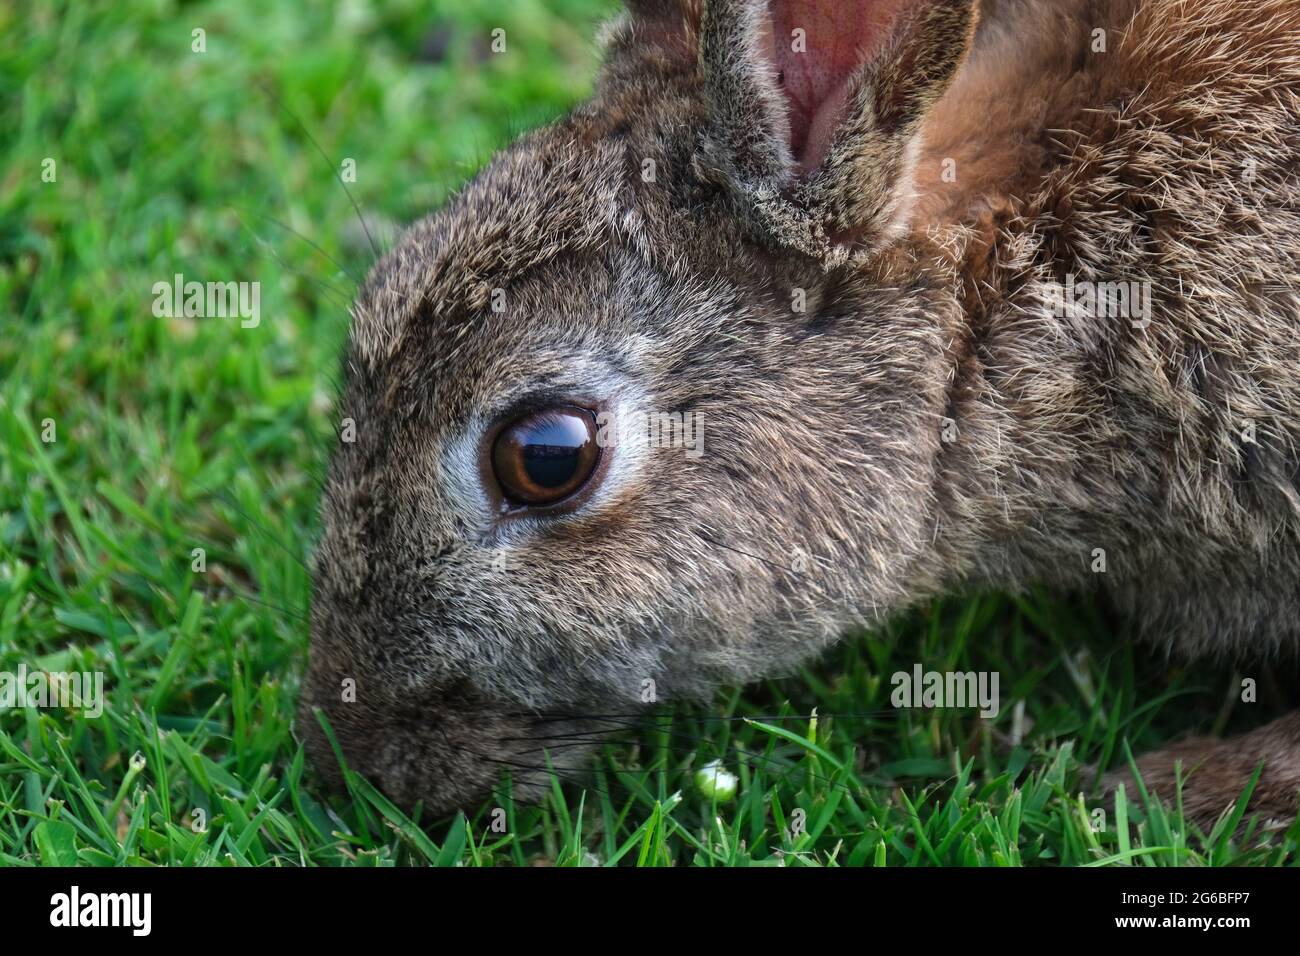 Rabbits are small mammals in the family Leporidae of the order Lagomorpha. Stock Photo